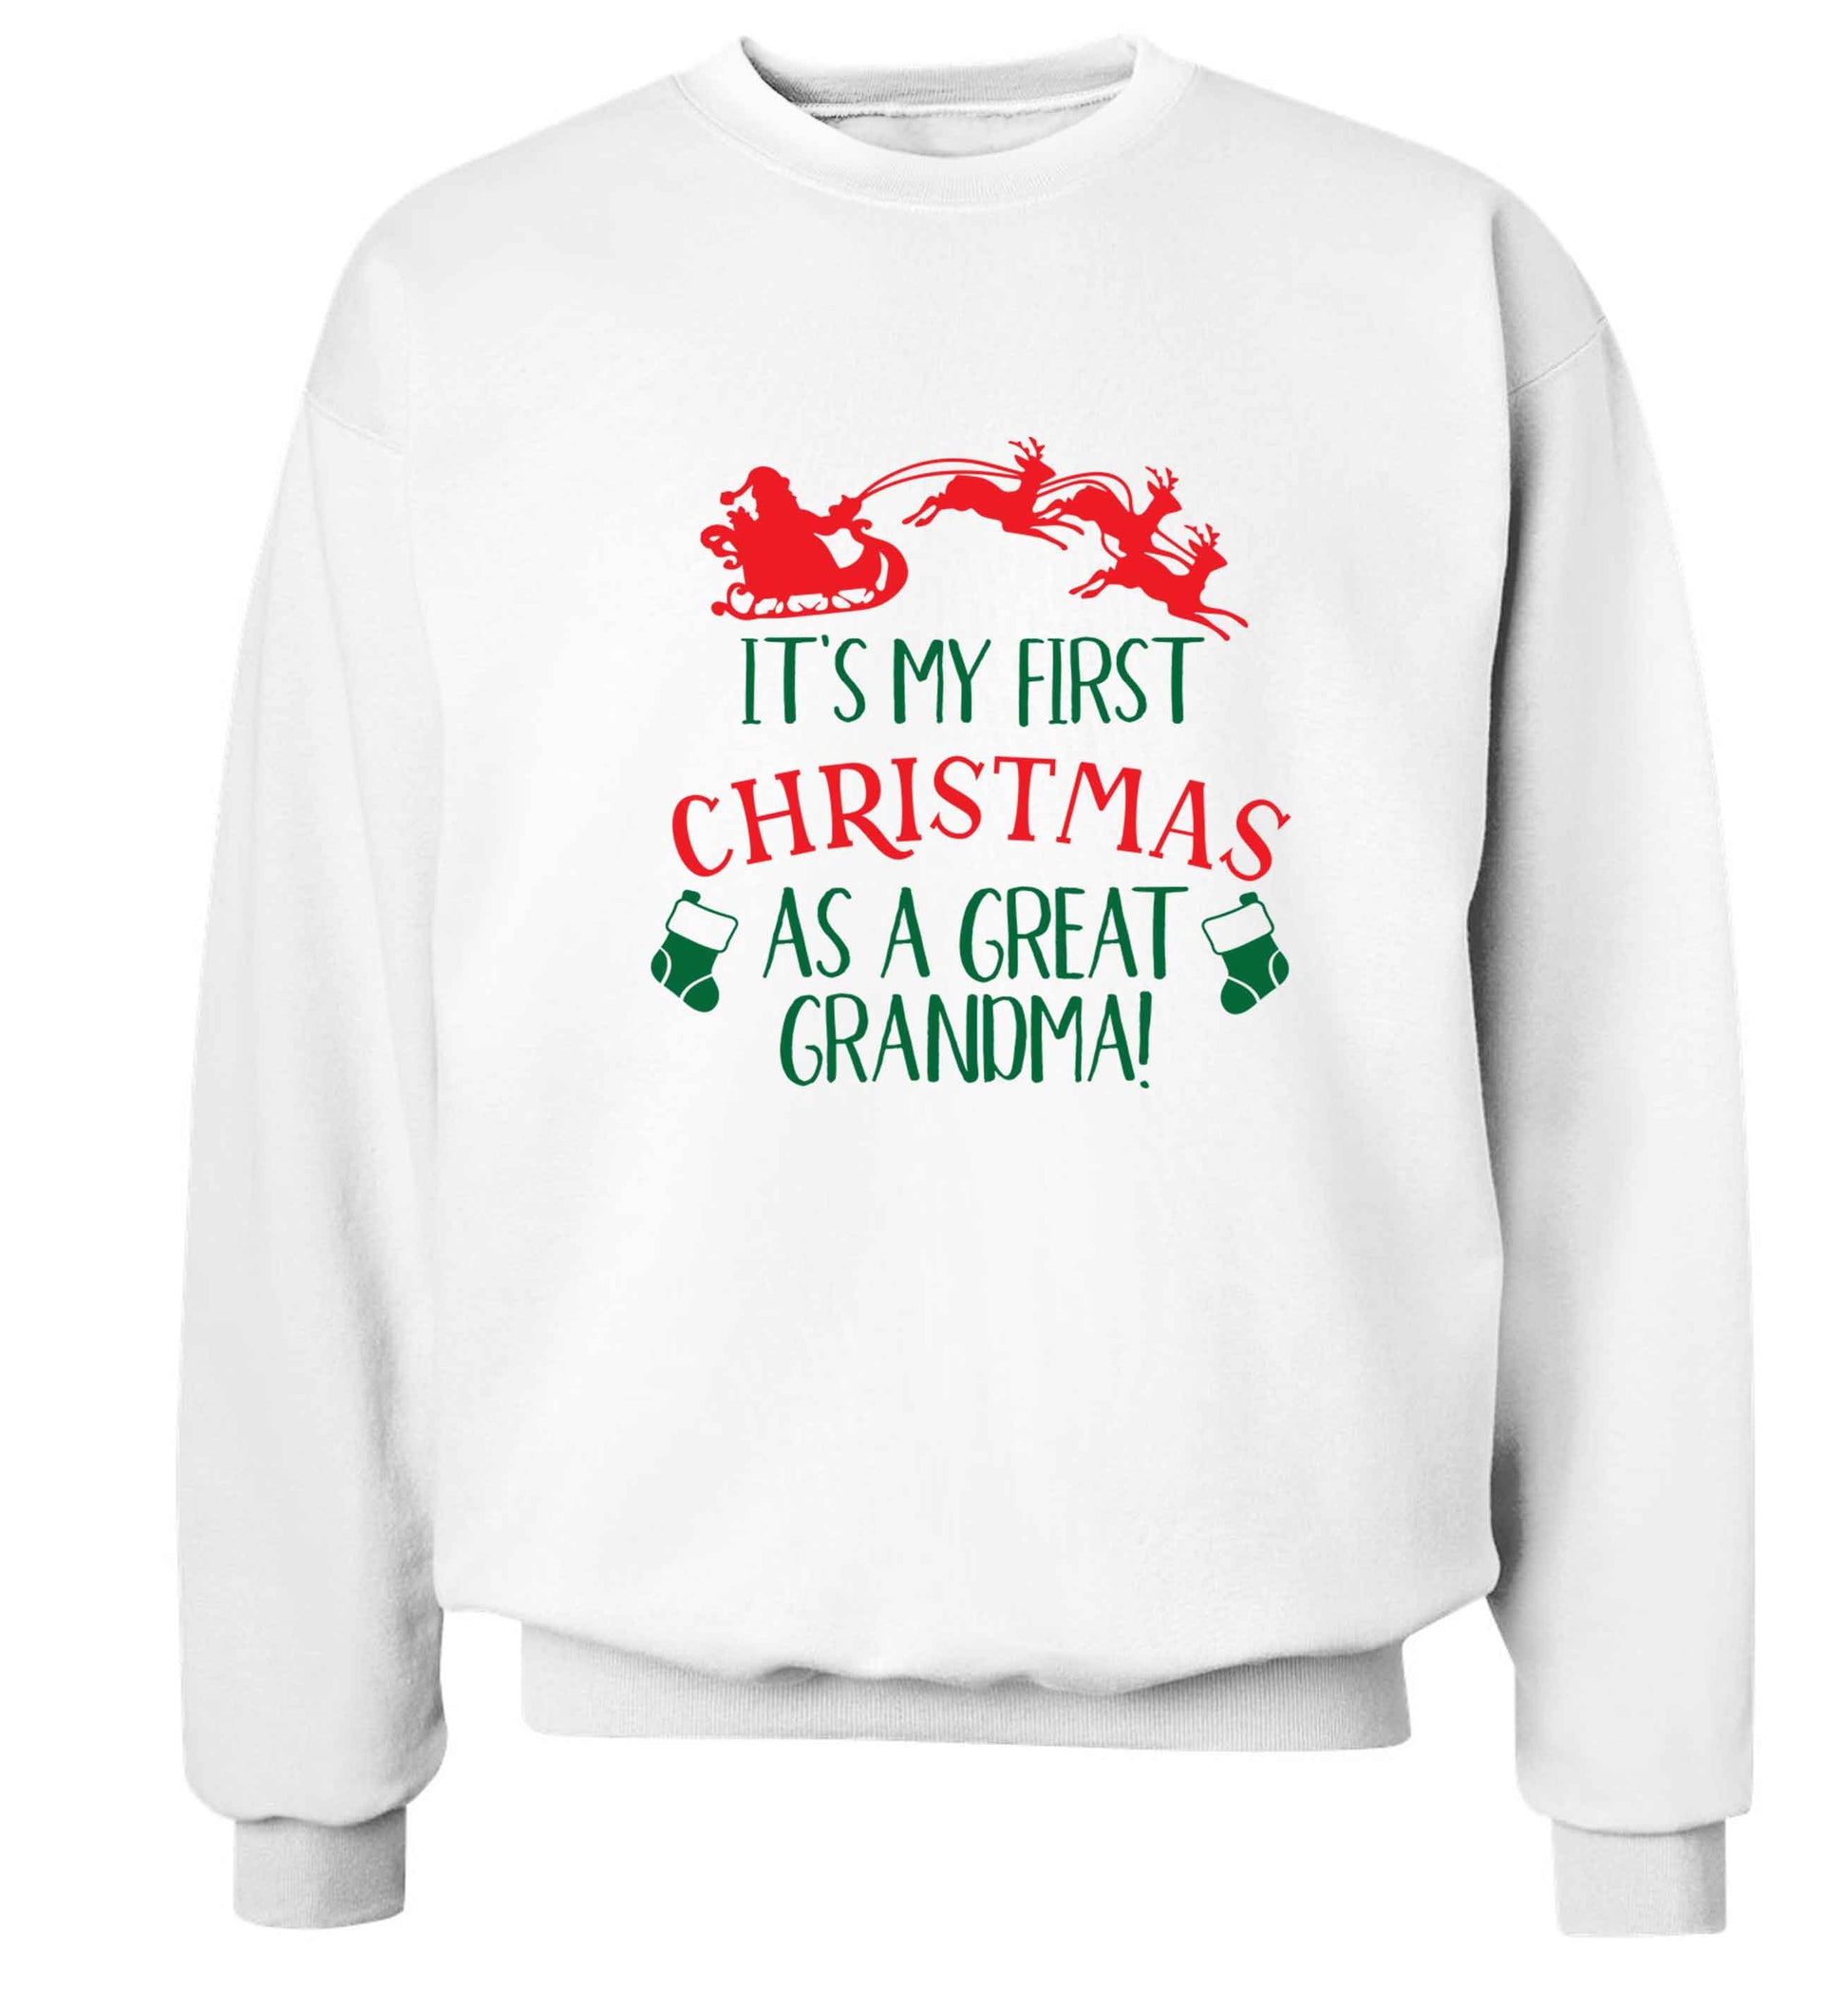 It's my first Christmas as a great grandma! Adult's unisex white Sweater 2XL